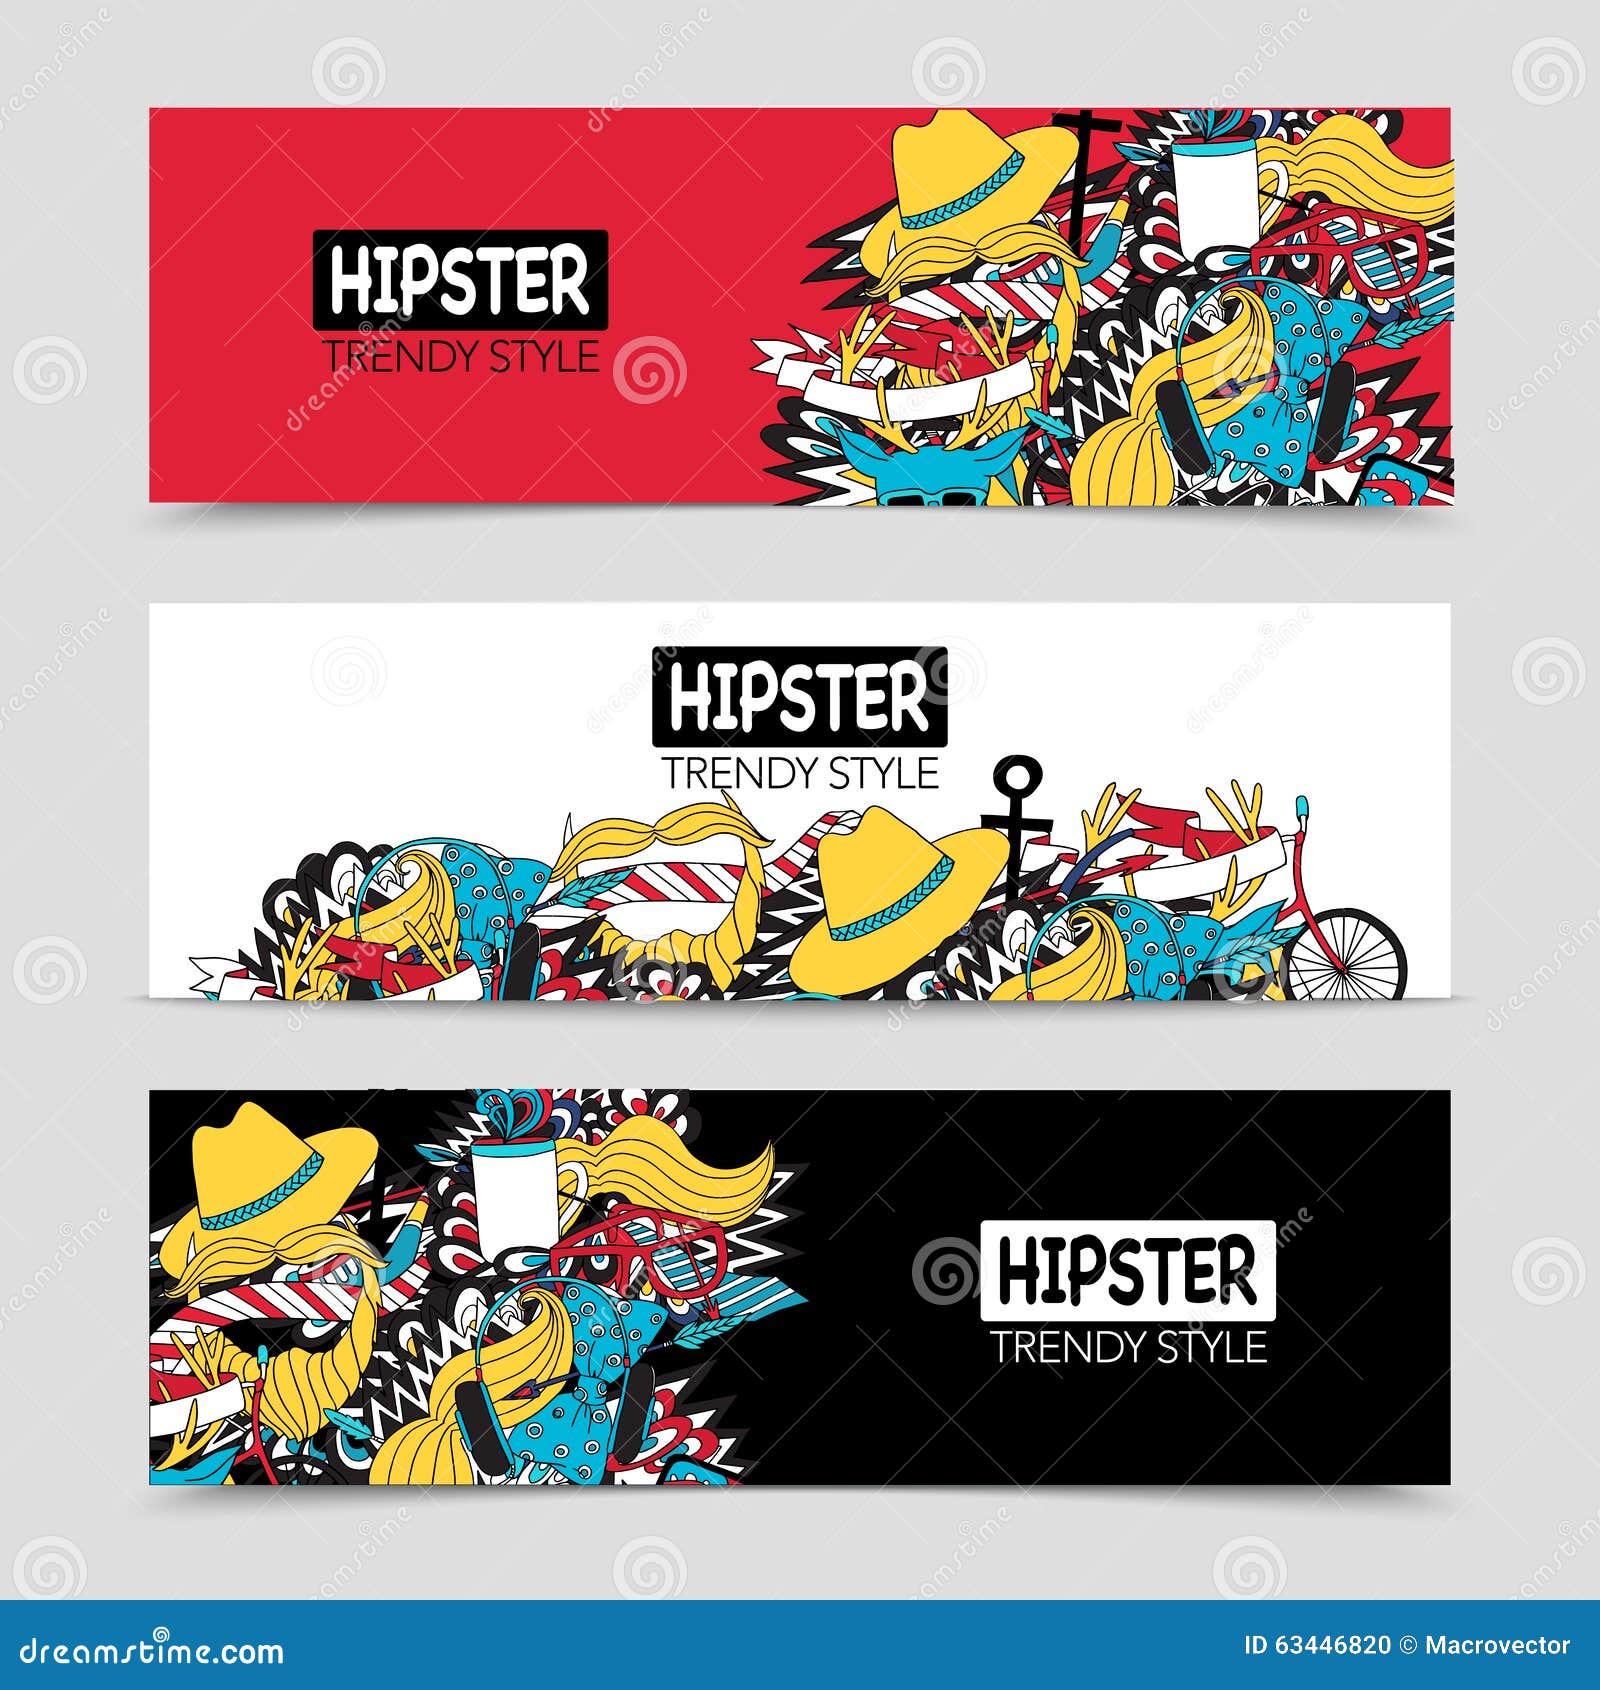 hipster 3 interactive horizontal banners set